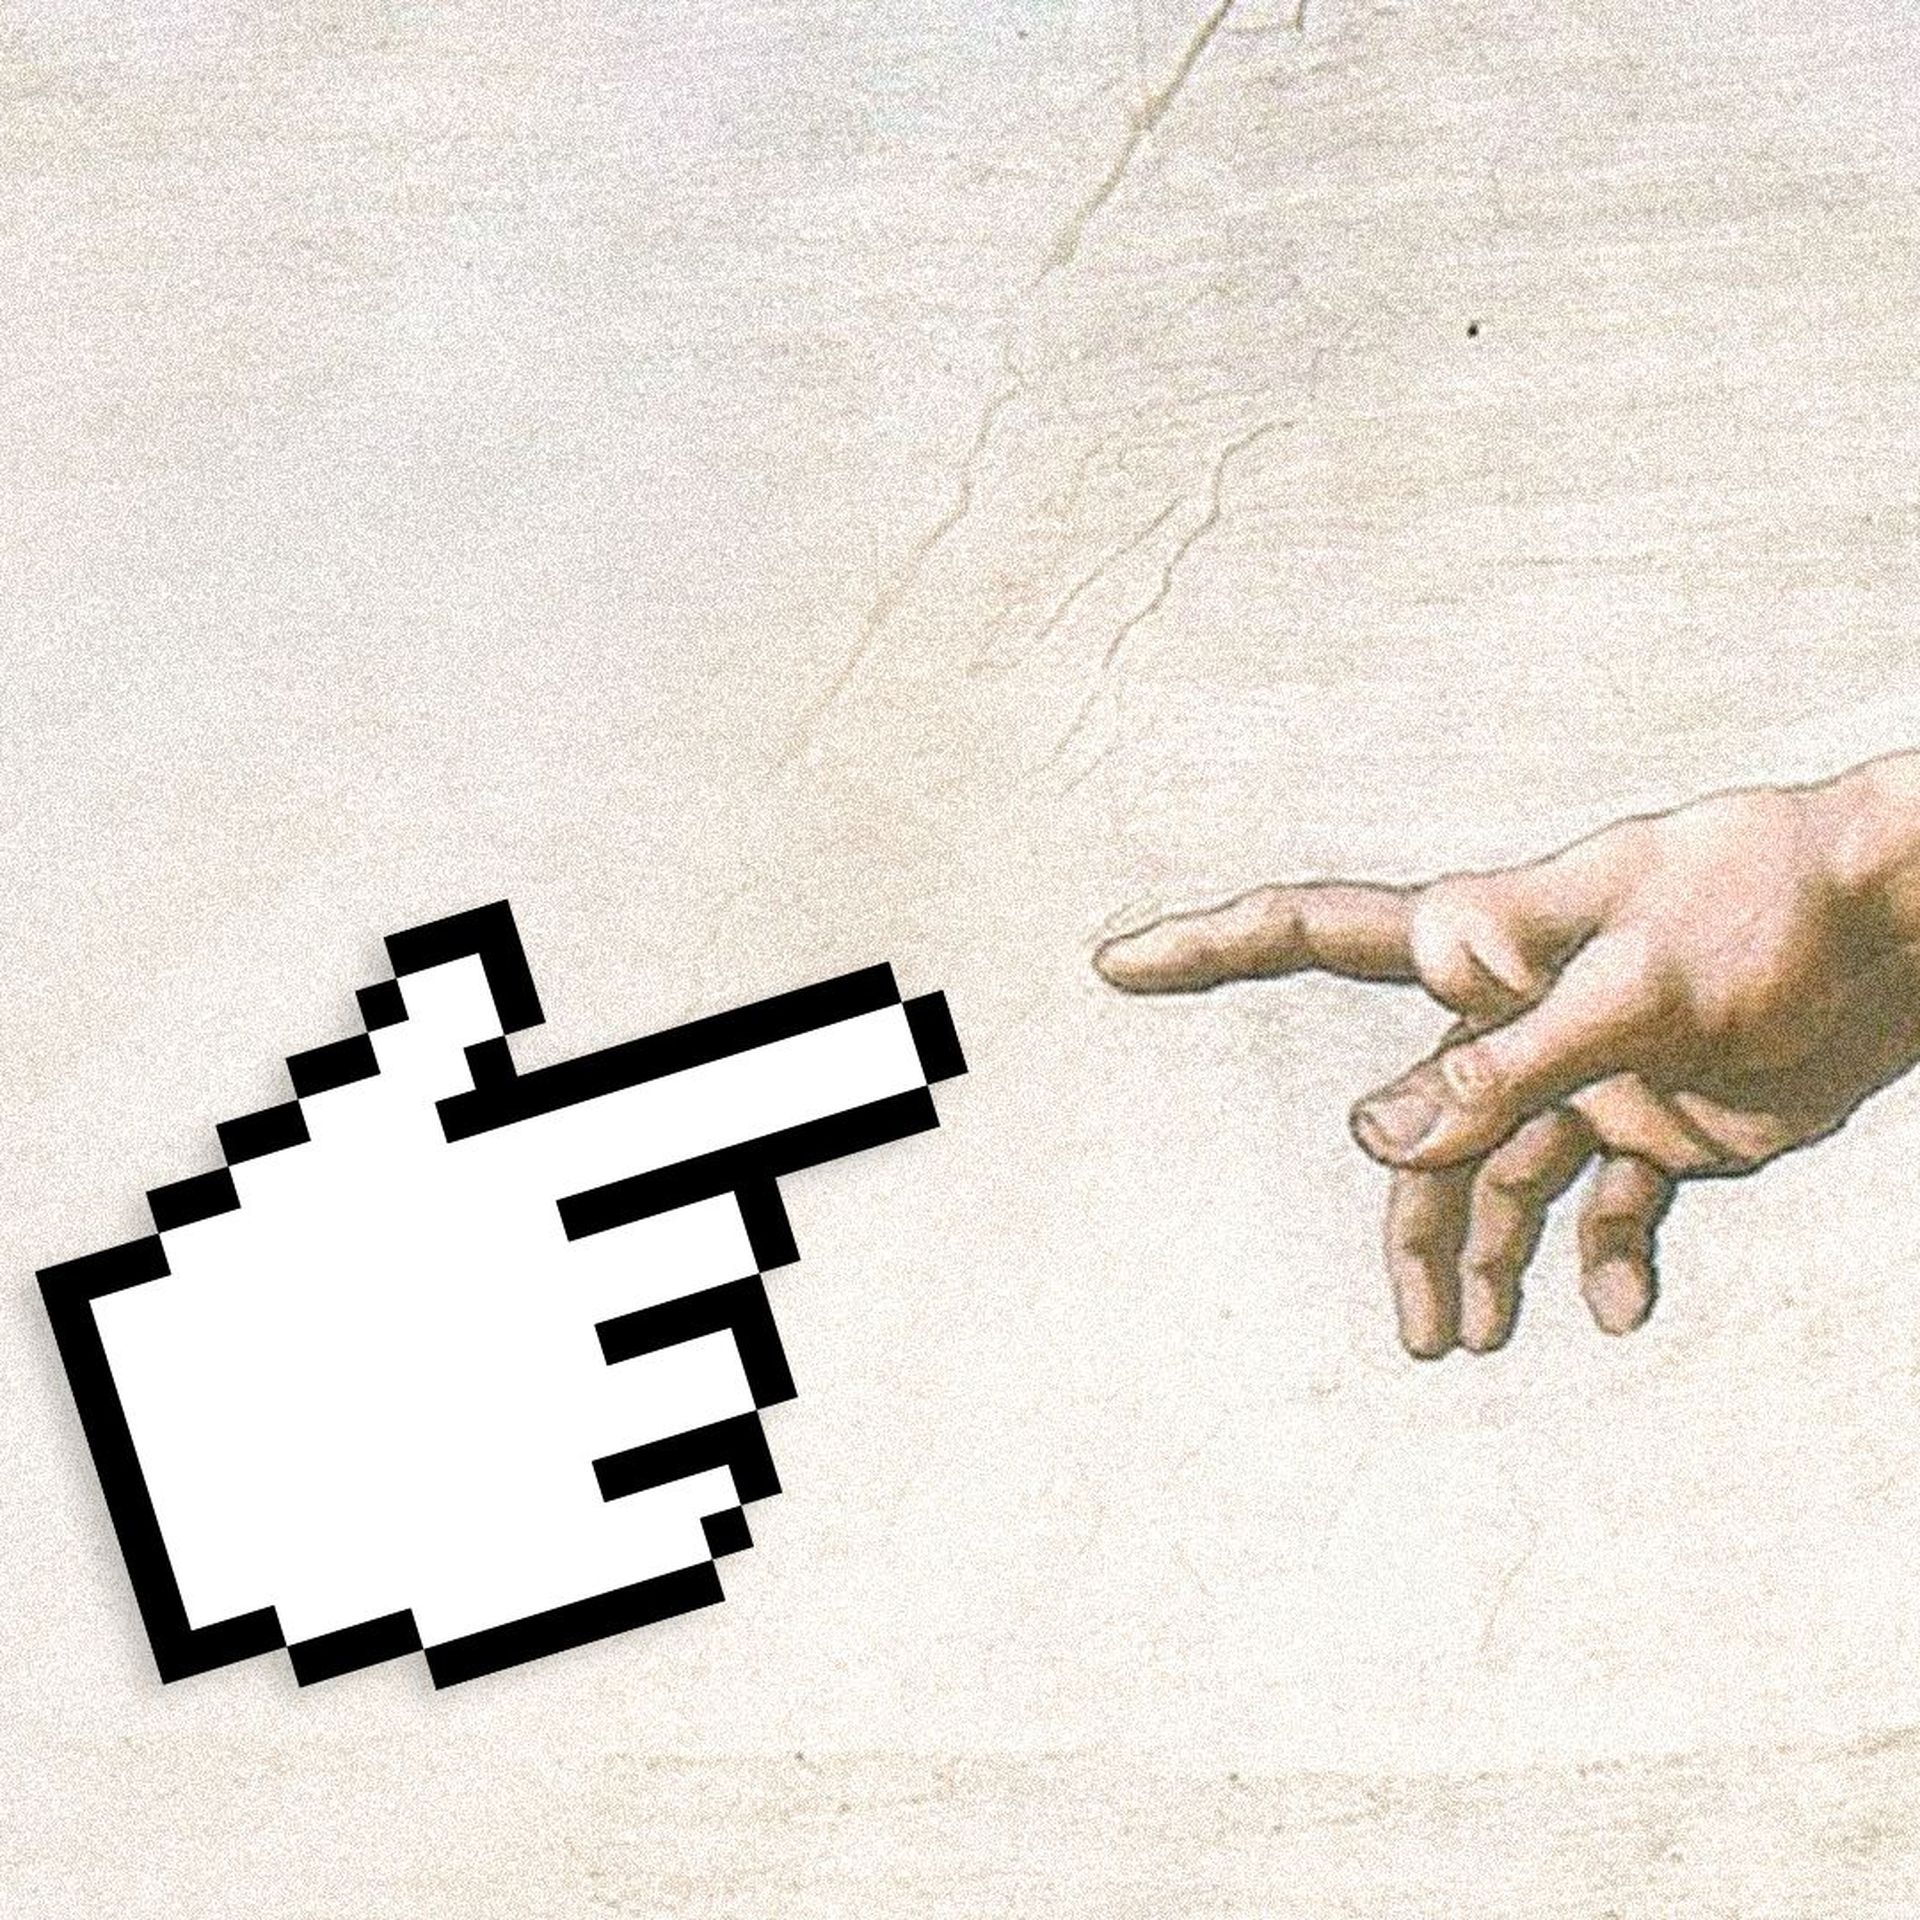 Illustration of The Creation of Adam with Adam's hand replaced with a hand cursor.  